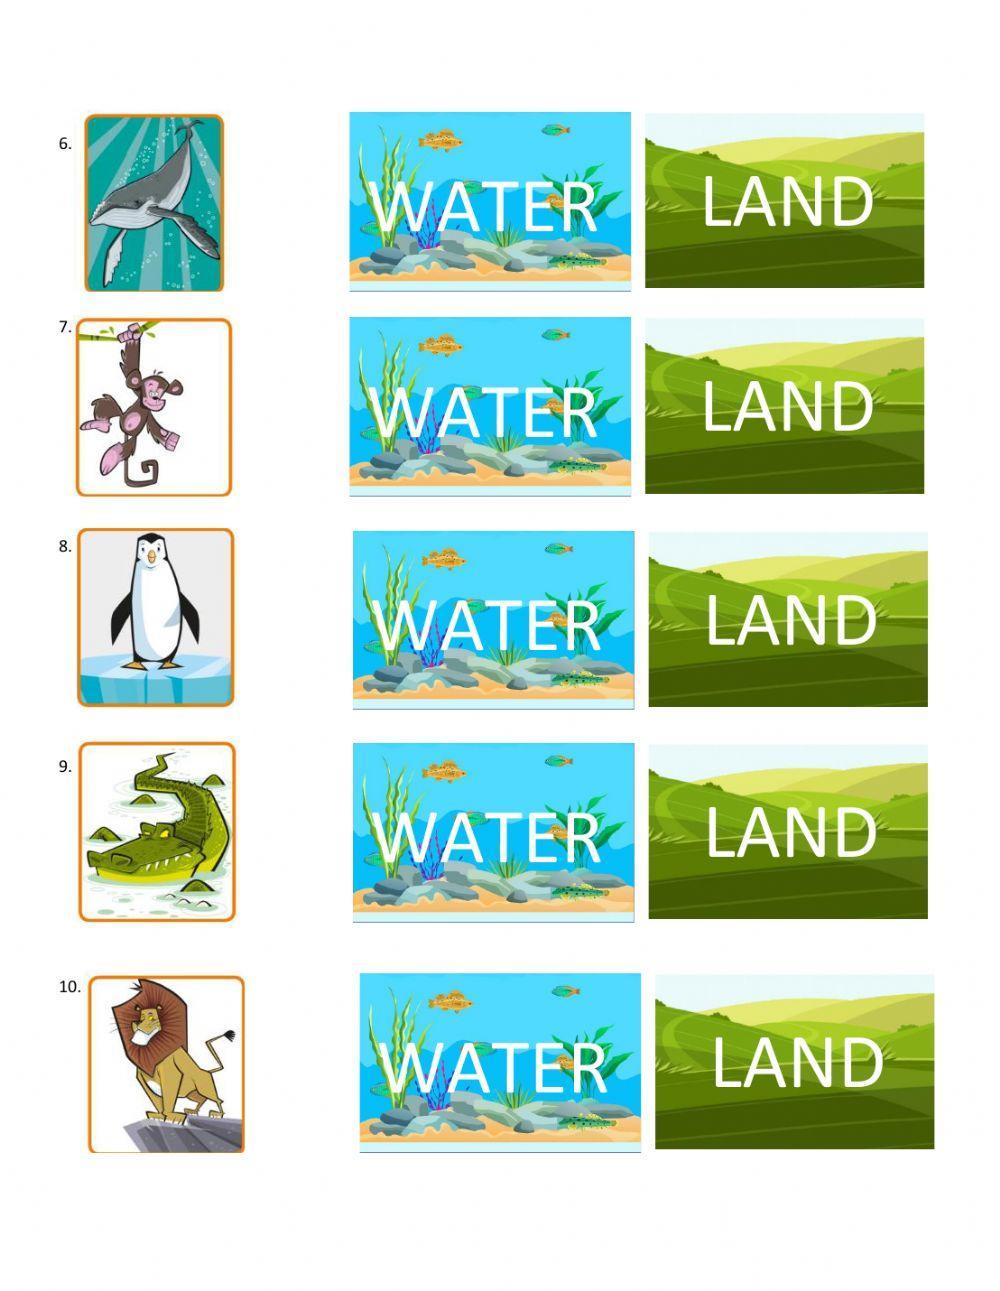 Land or water